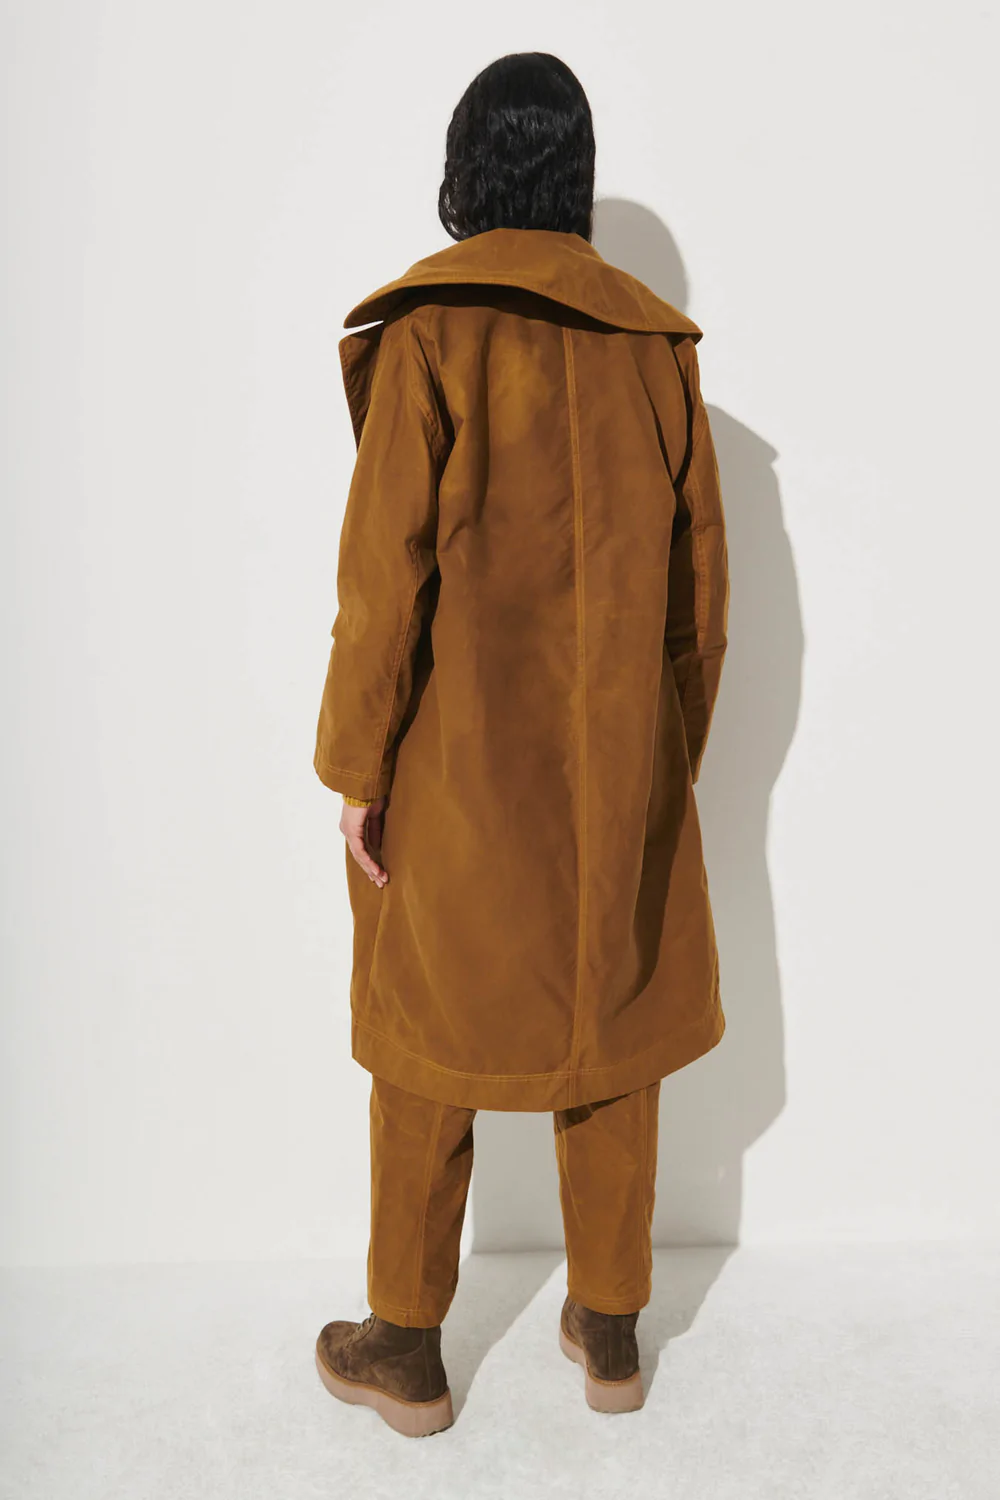 Product Image for Release Coat, Brown